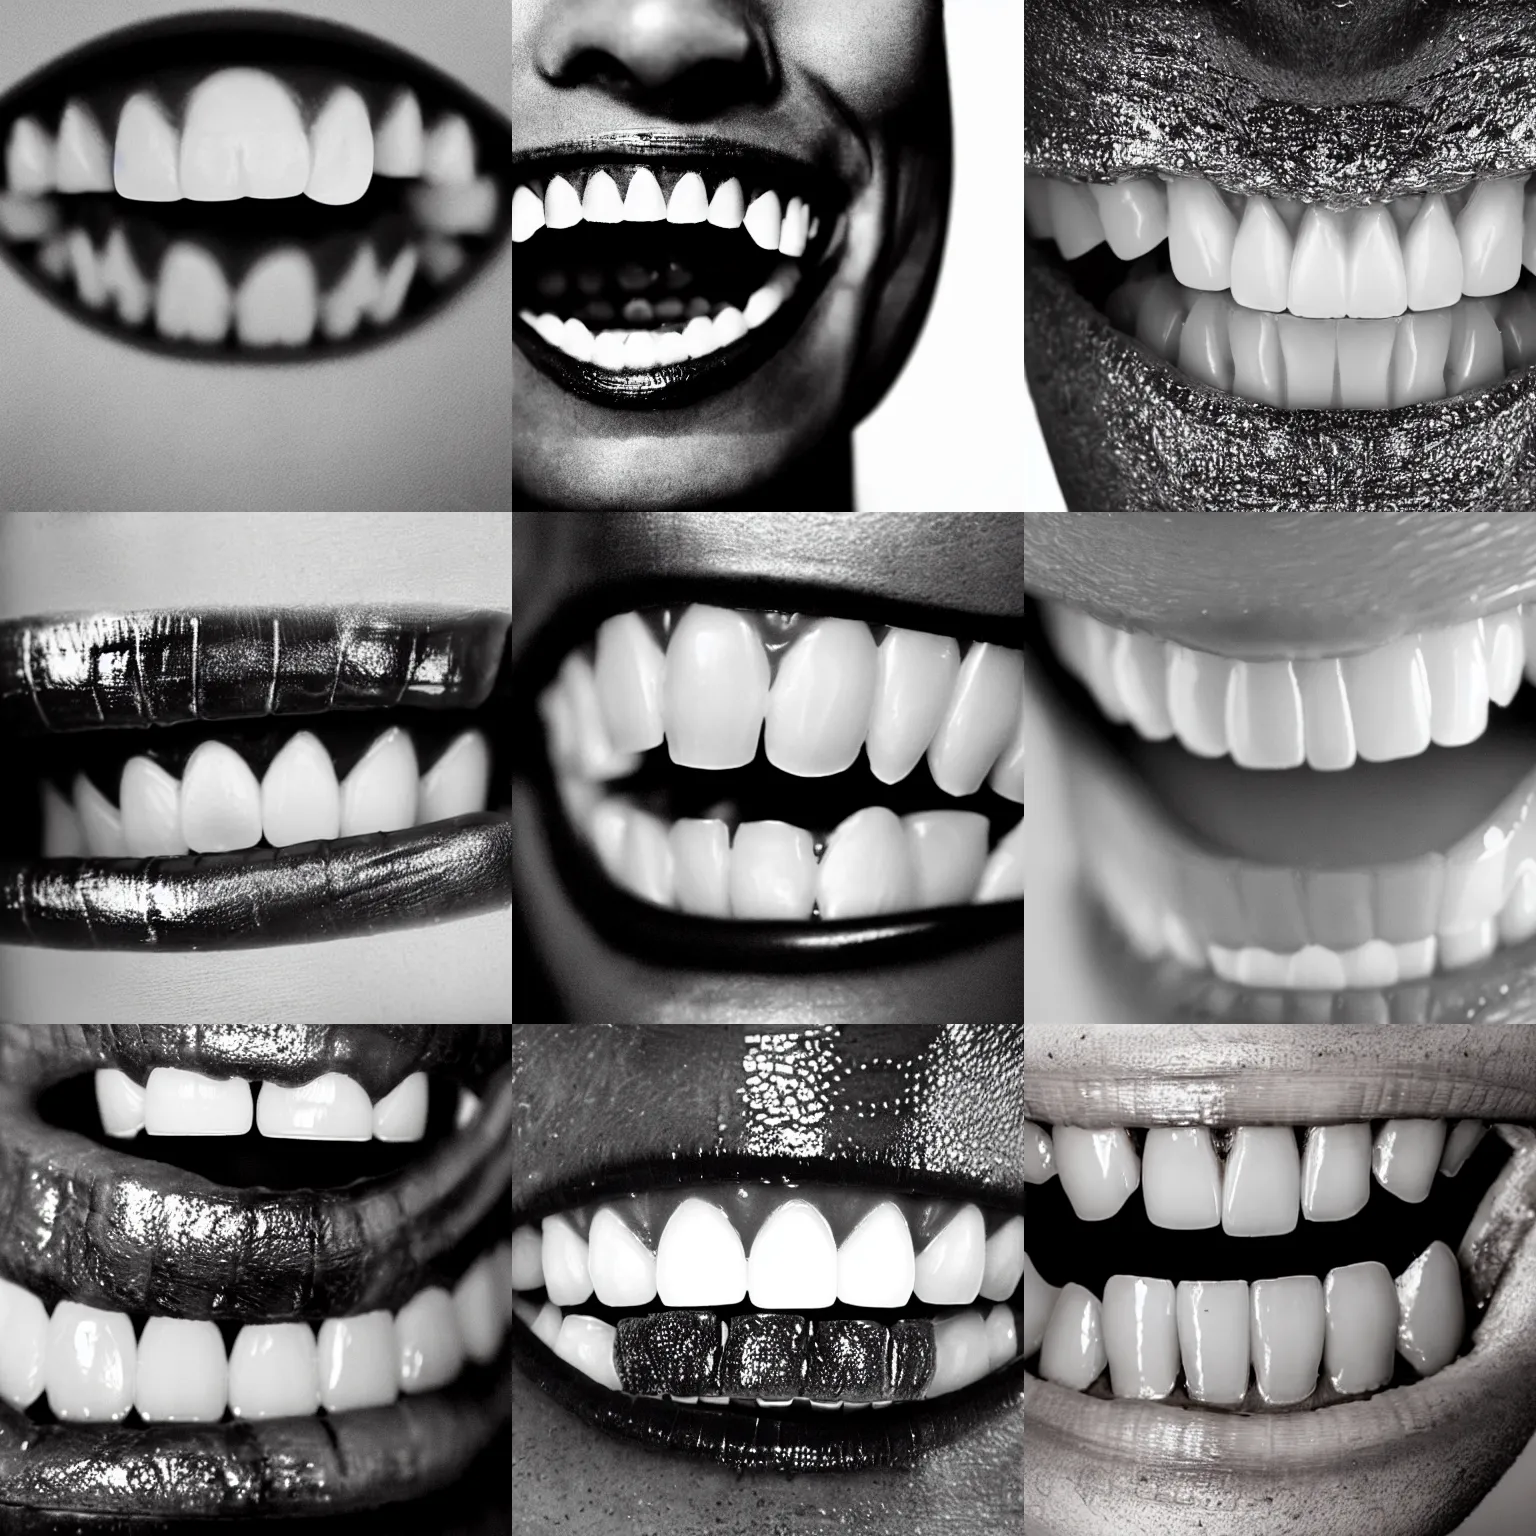 Prompt: close up of teeth with metallic grills, gritty grainy black and white film photograph, album artwork